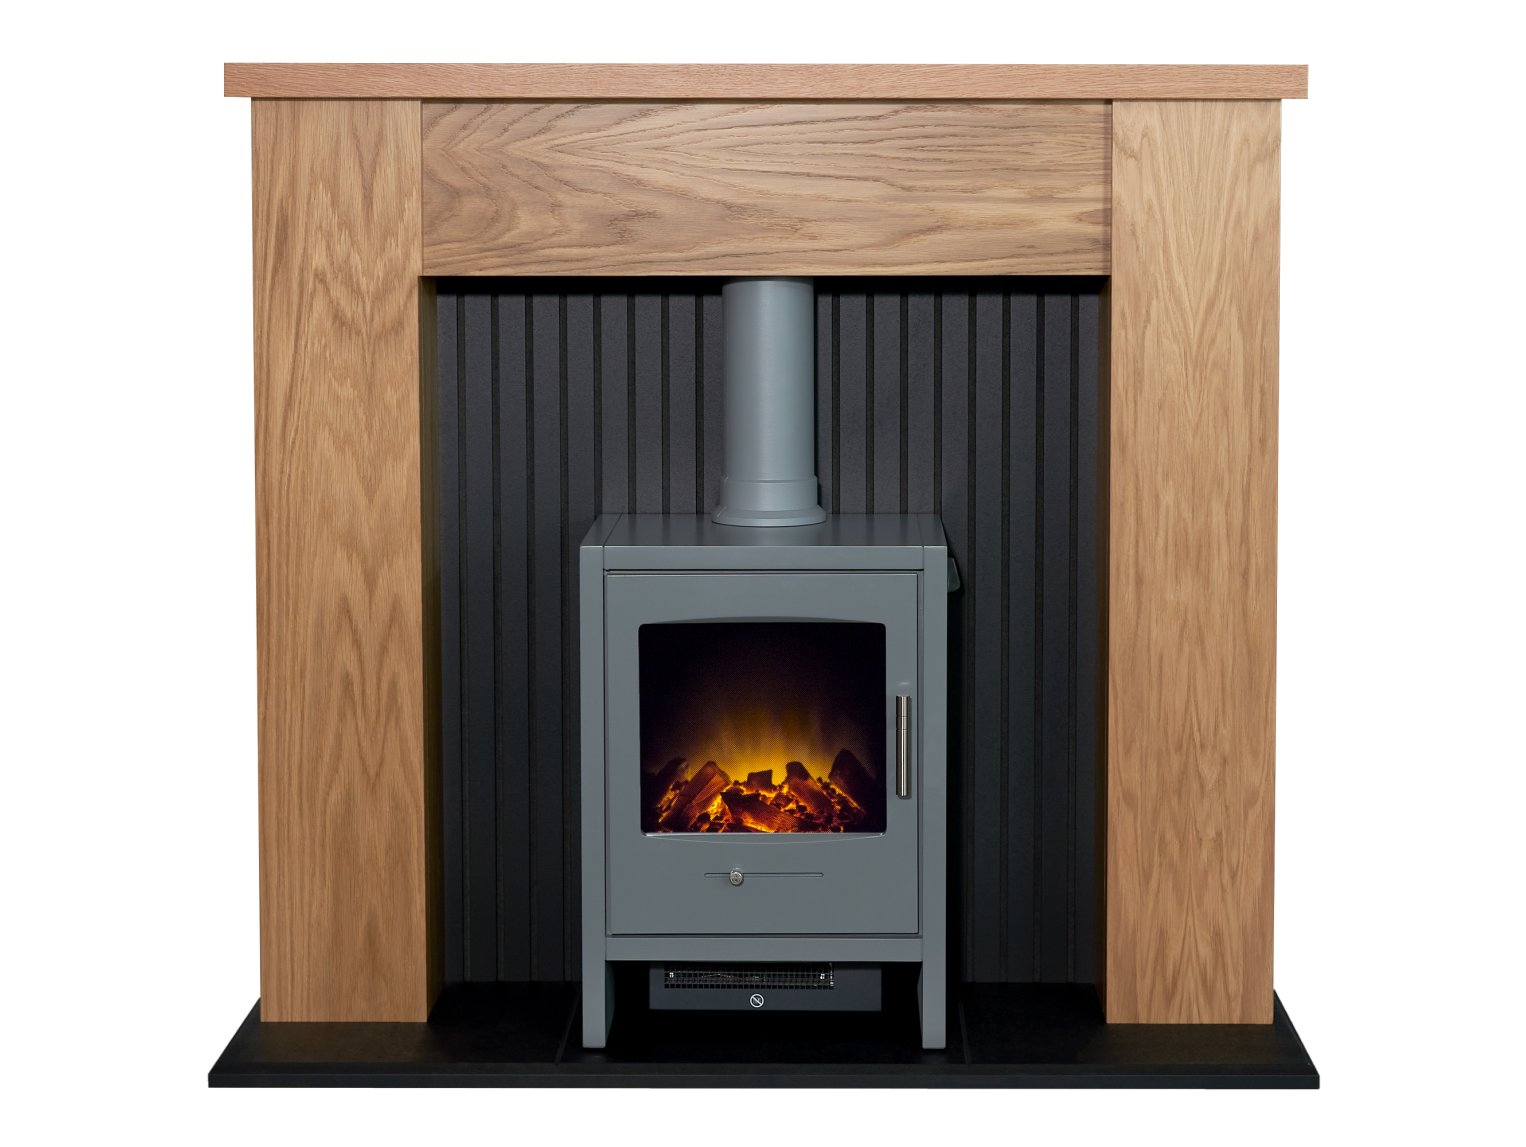 Adam New England Stove Fireplace in Oak & Black with Bergen Electric Stove in Grey, 48 Inch